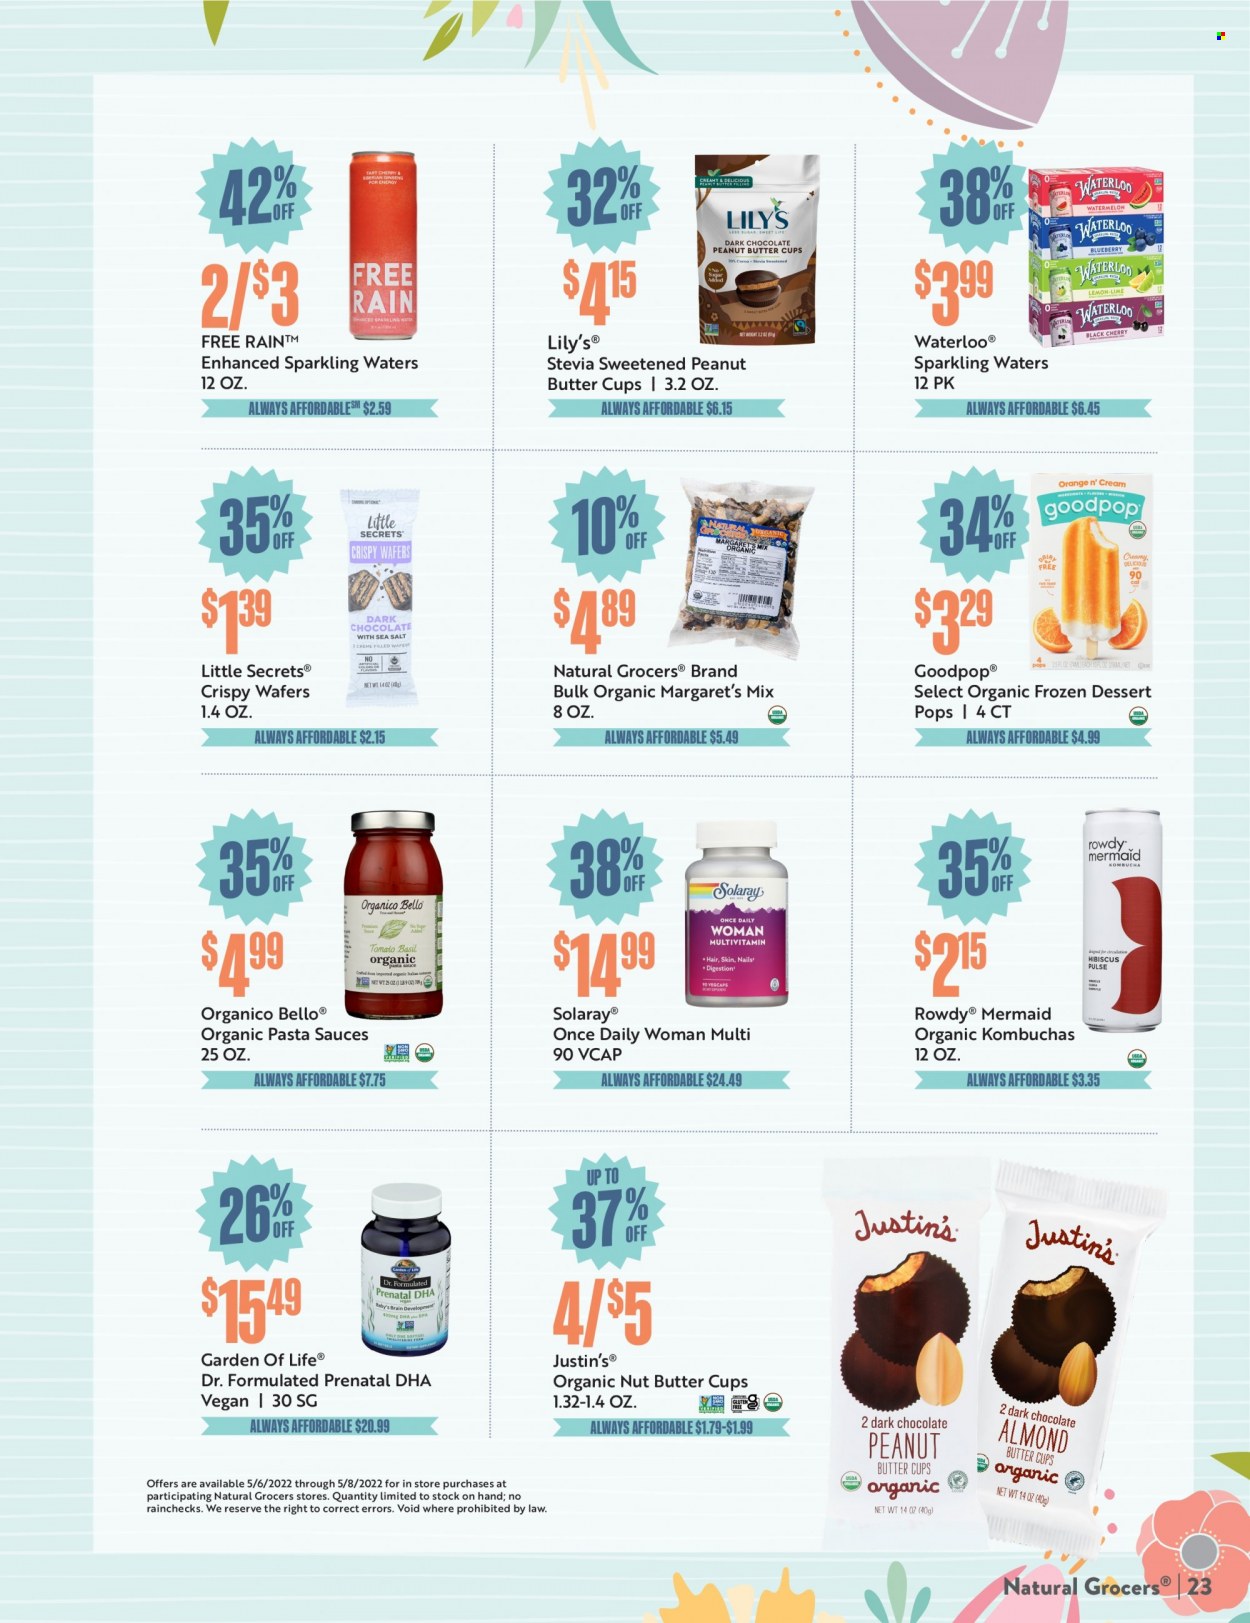 Natural Grocers ad  - 04.29.2022 - 05.21.2022.